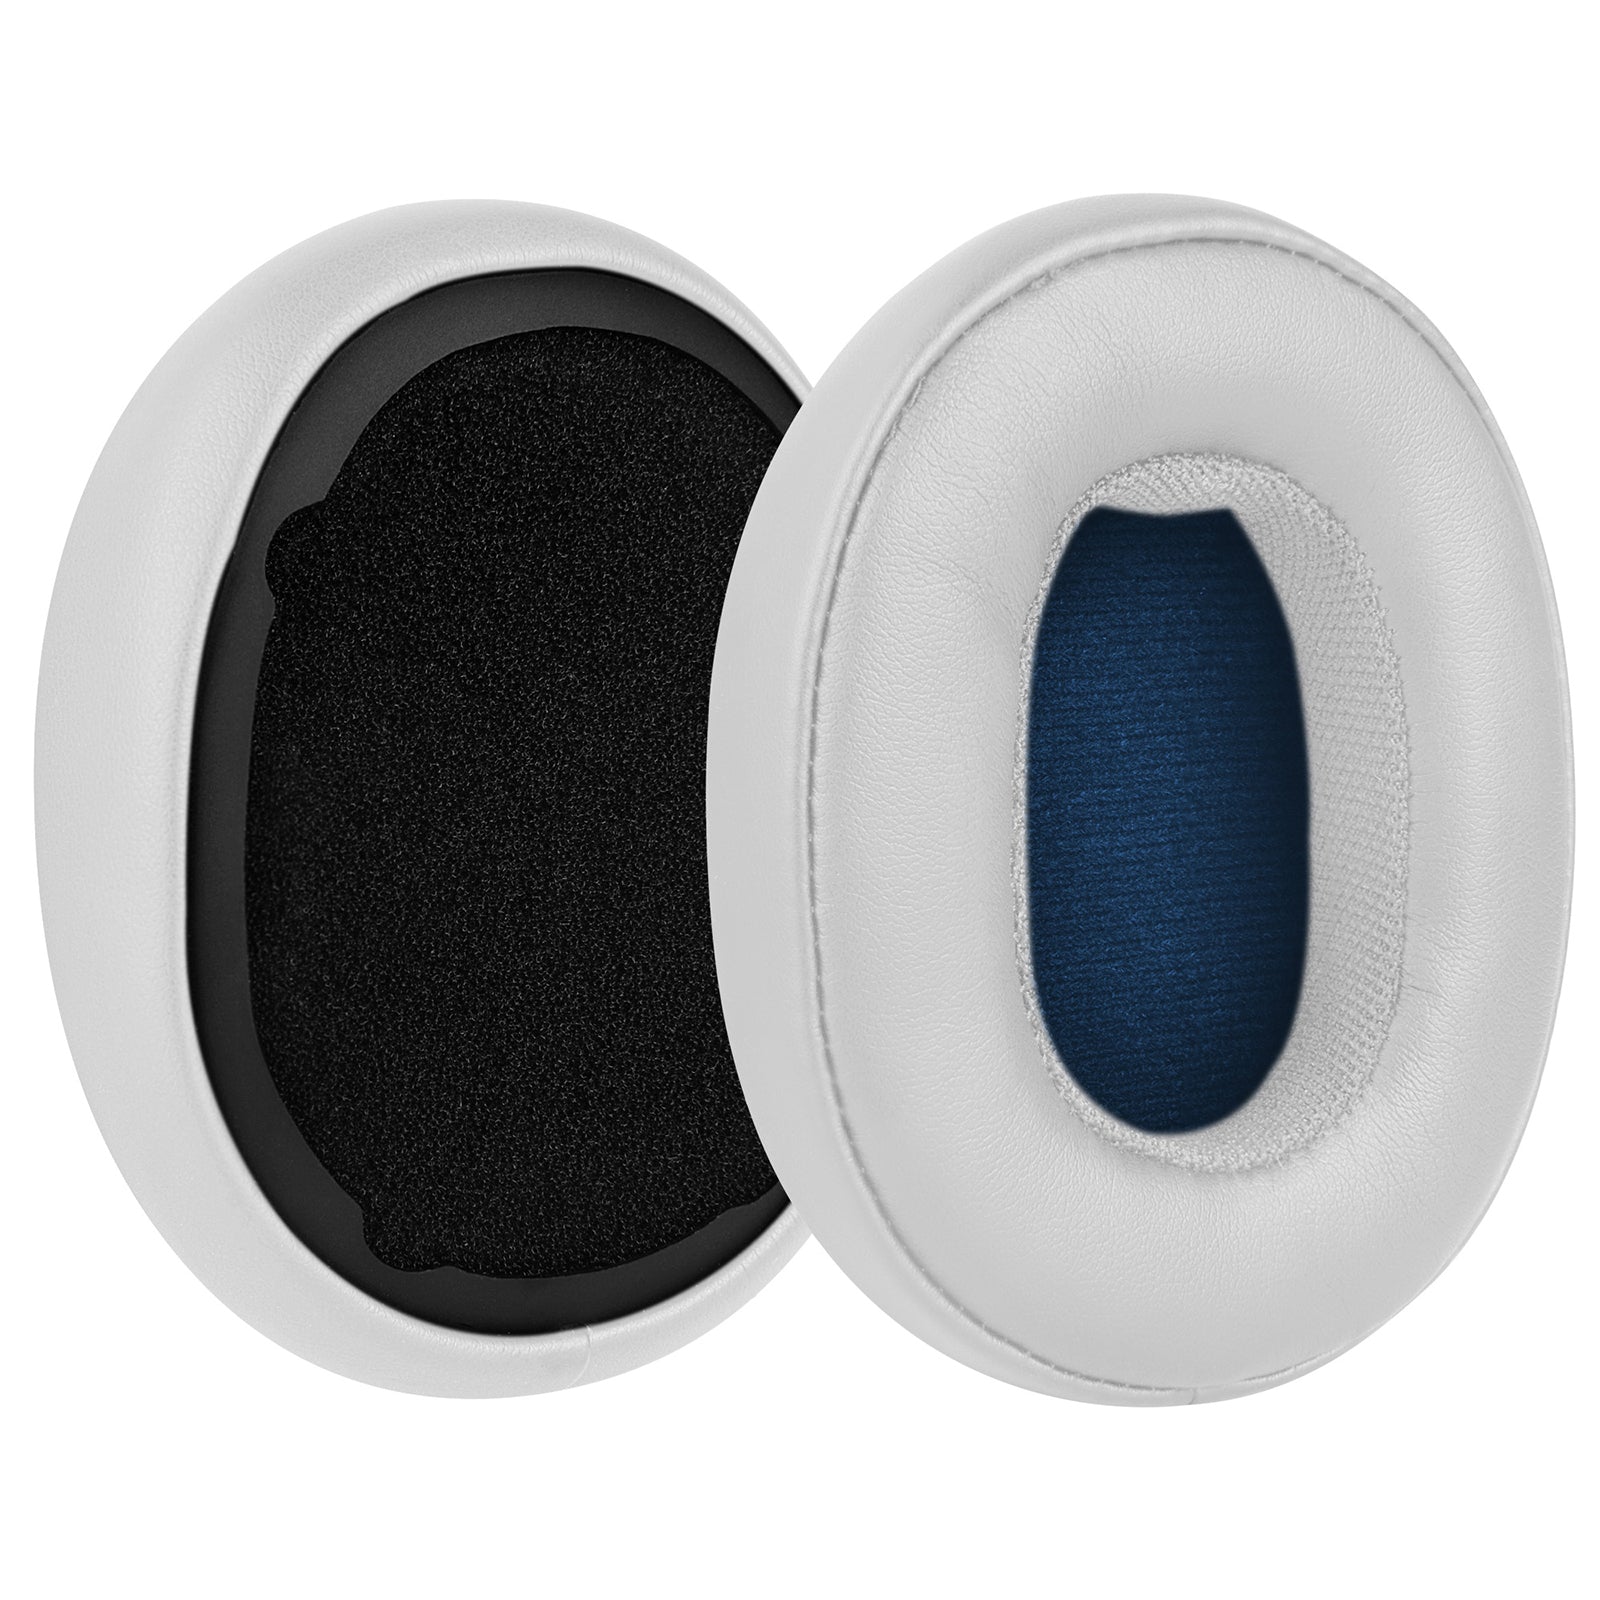 Geekria QuickFit Replacement Ear Pads for Skullcandy Venue Wireless AN